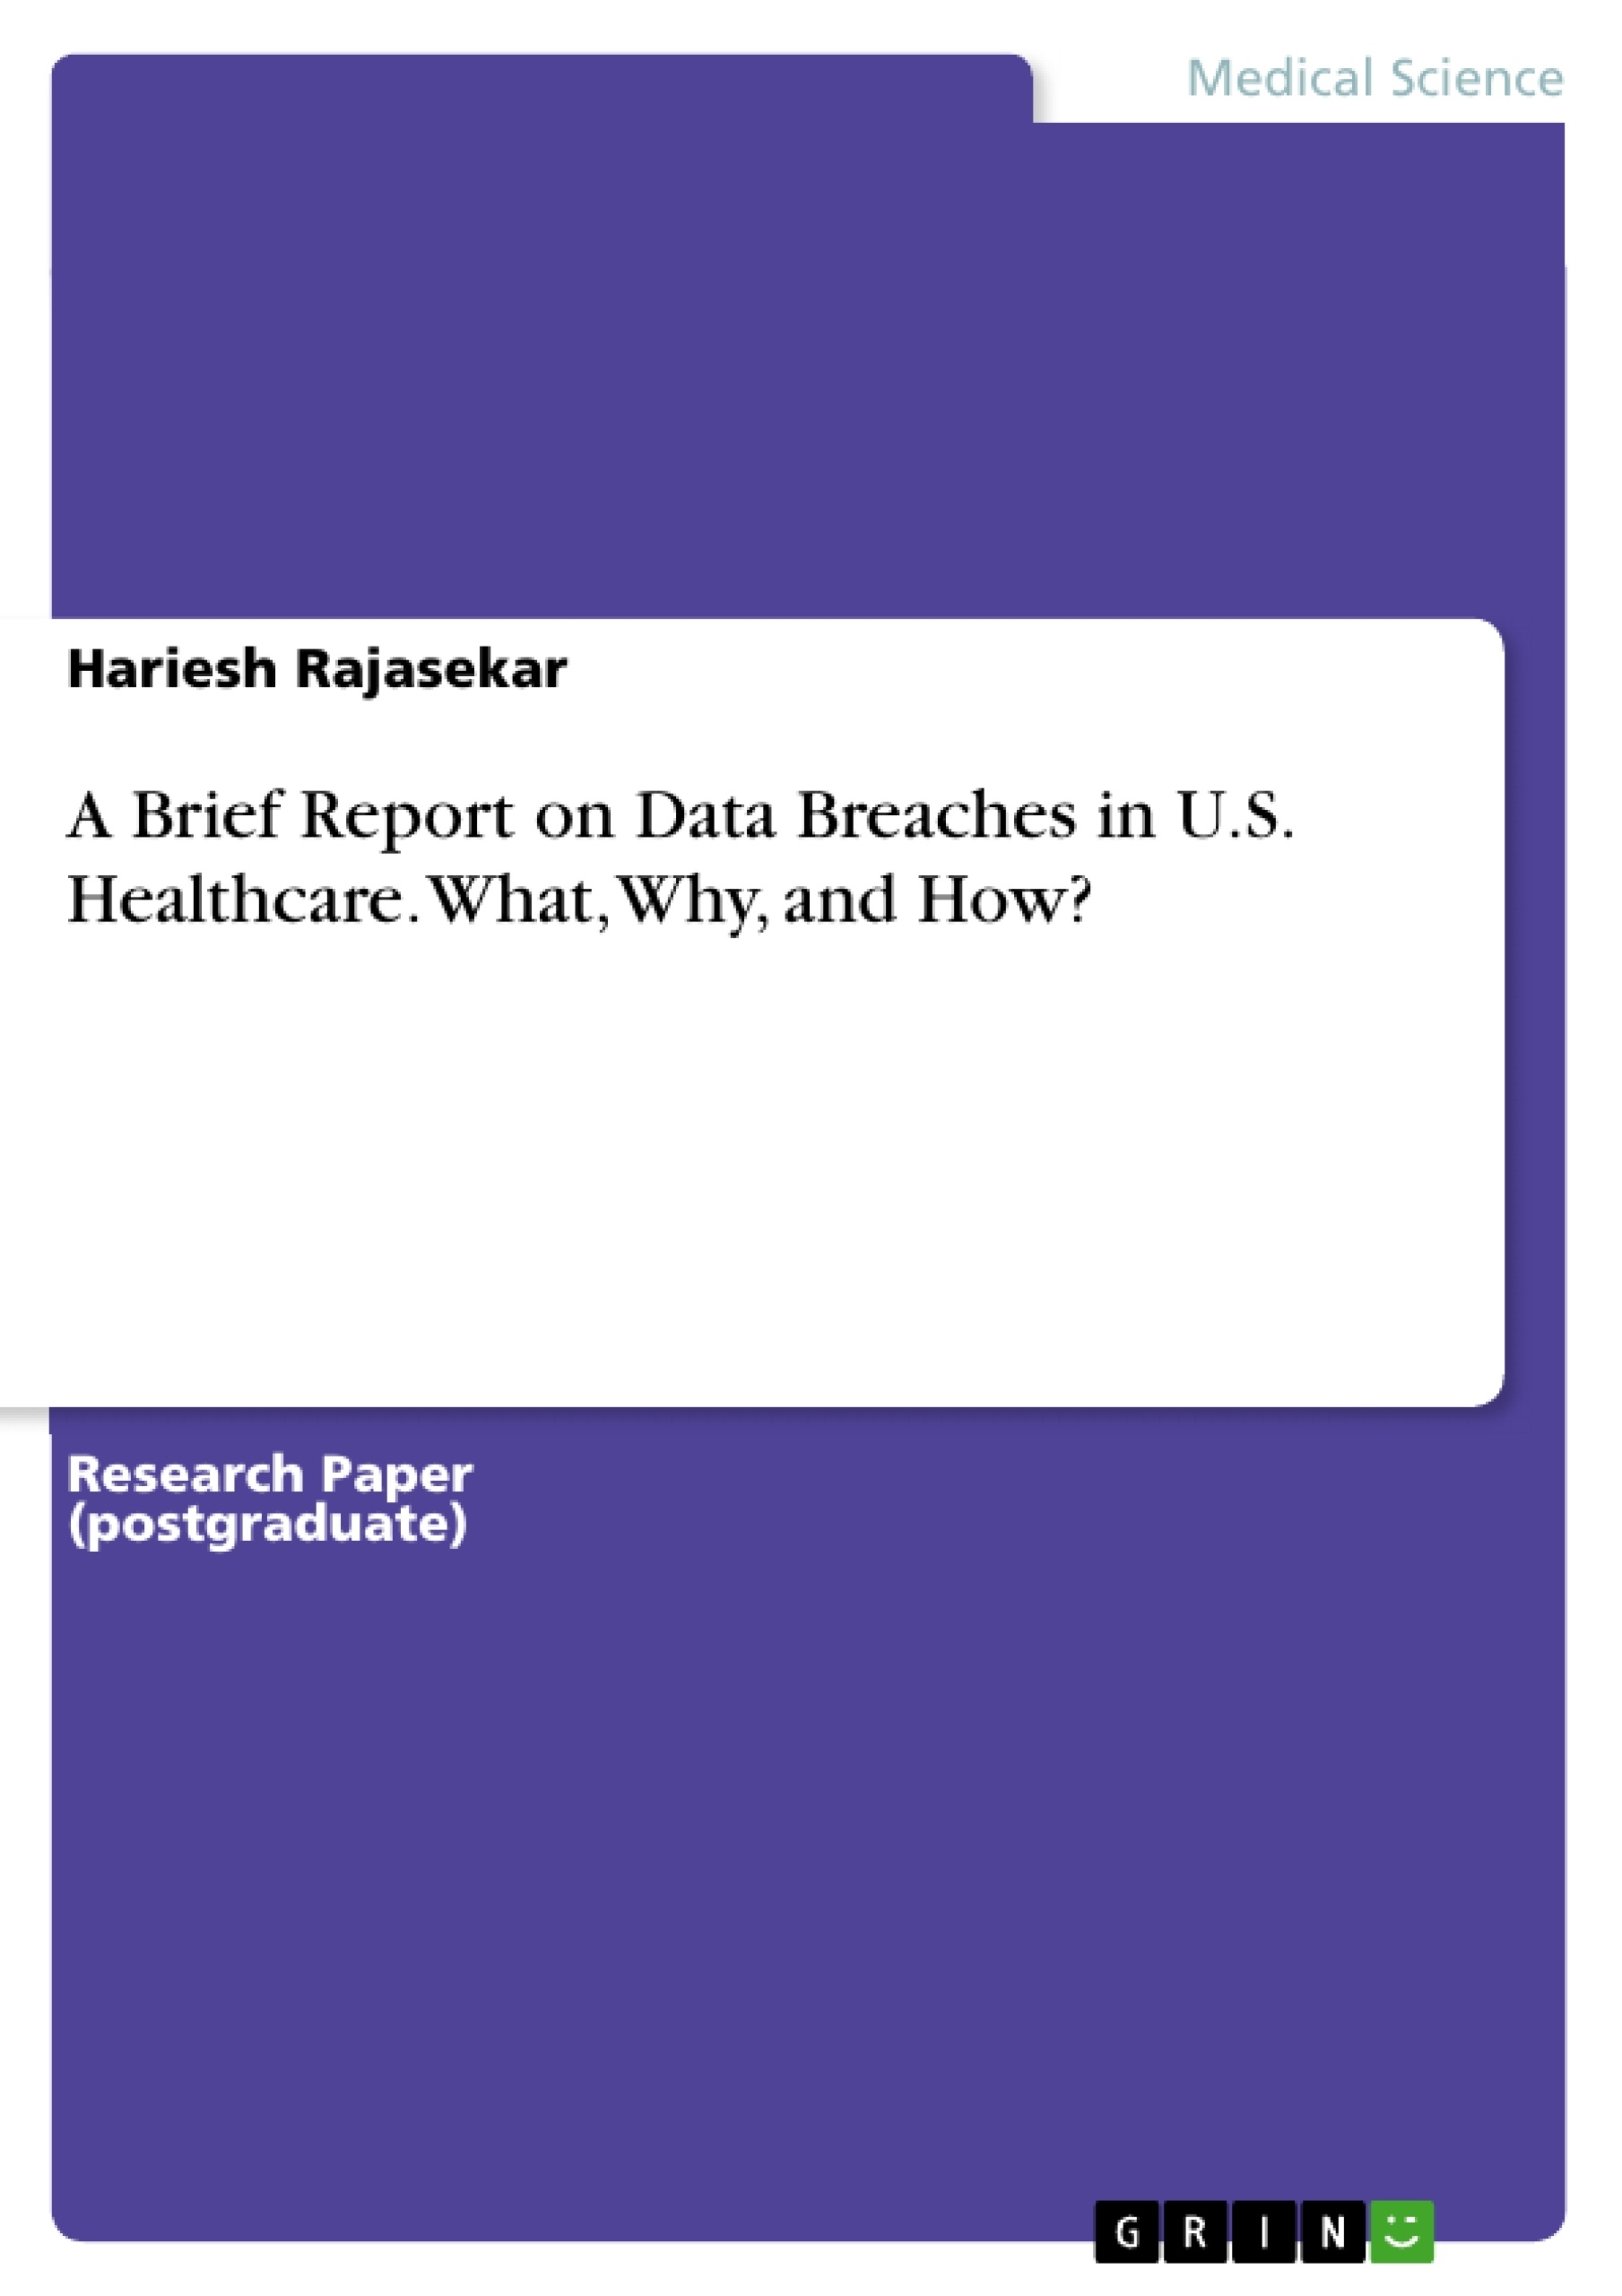 Title: A Brief Report on Data Breaches in U.S. Healthcare. What, Why, and How?